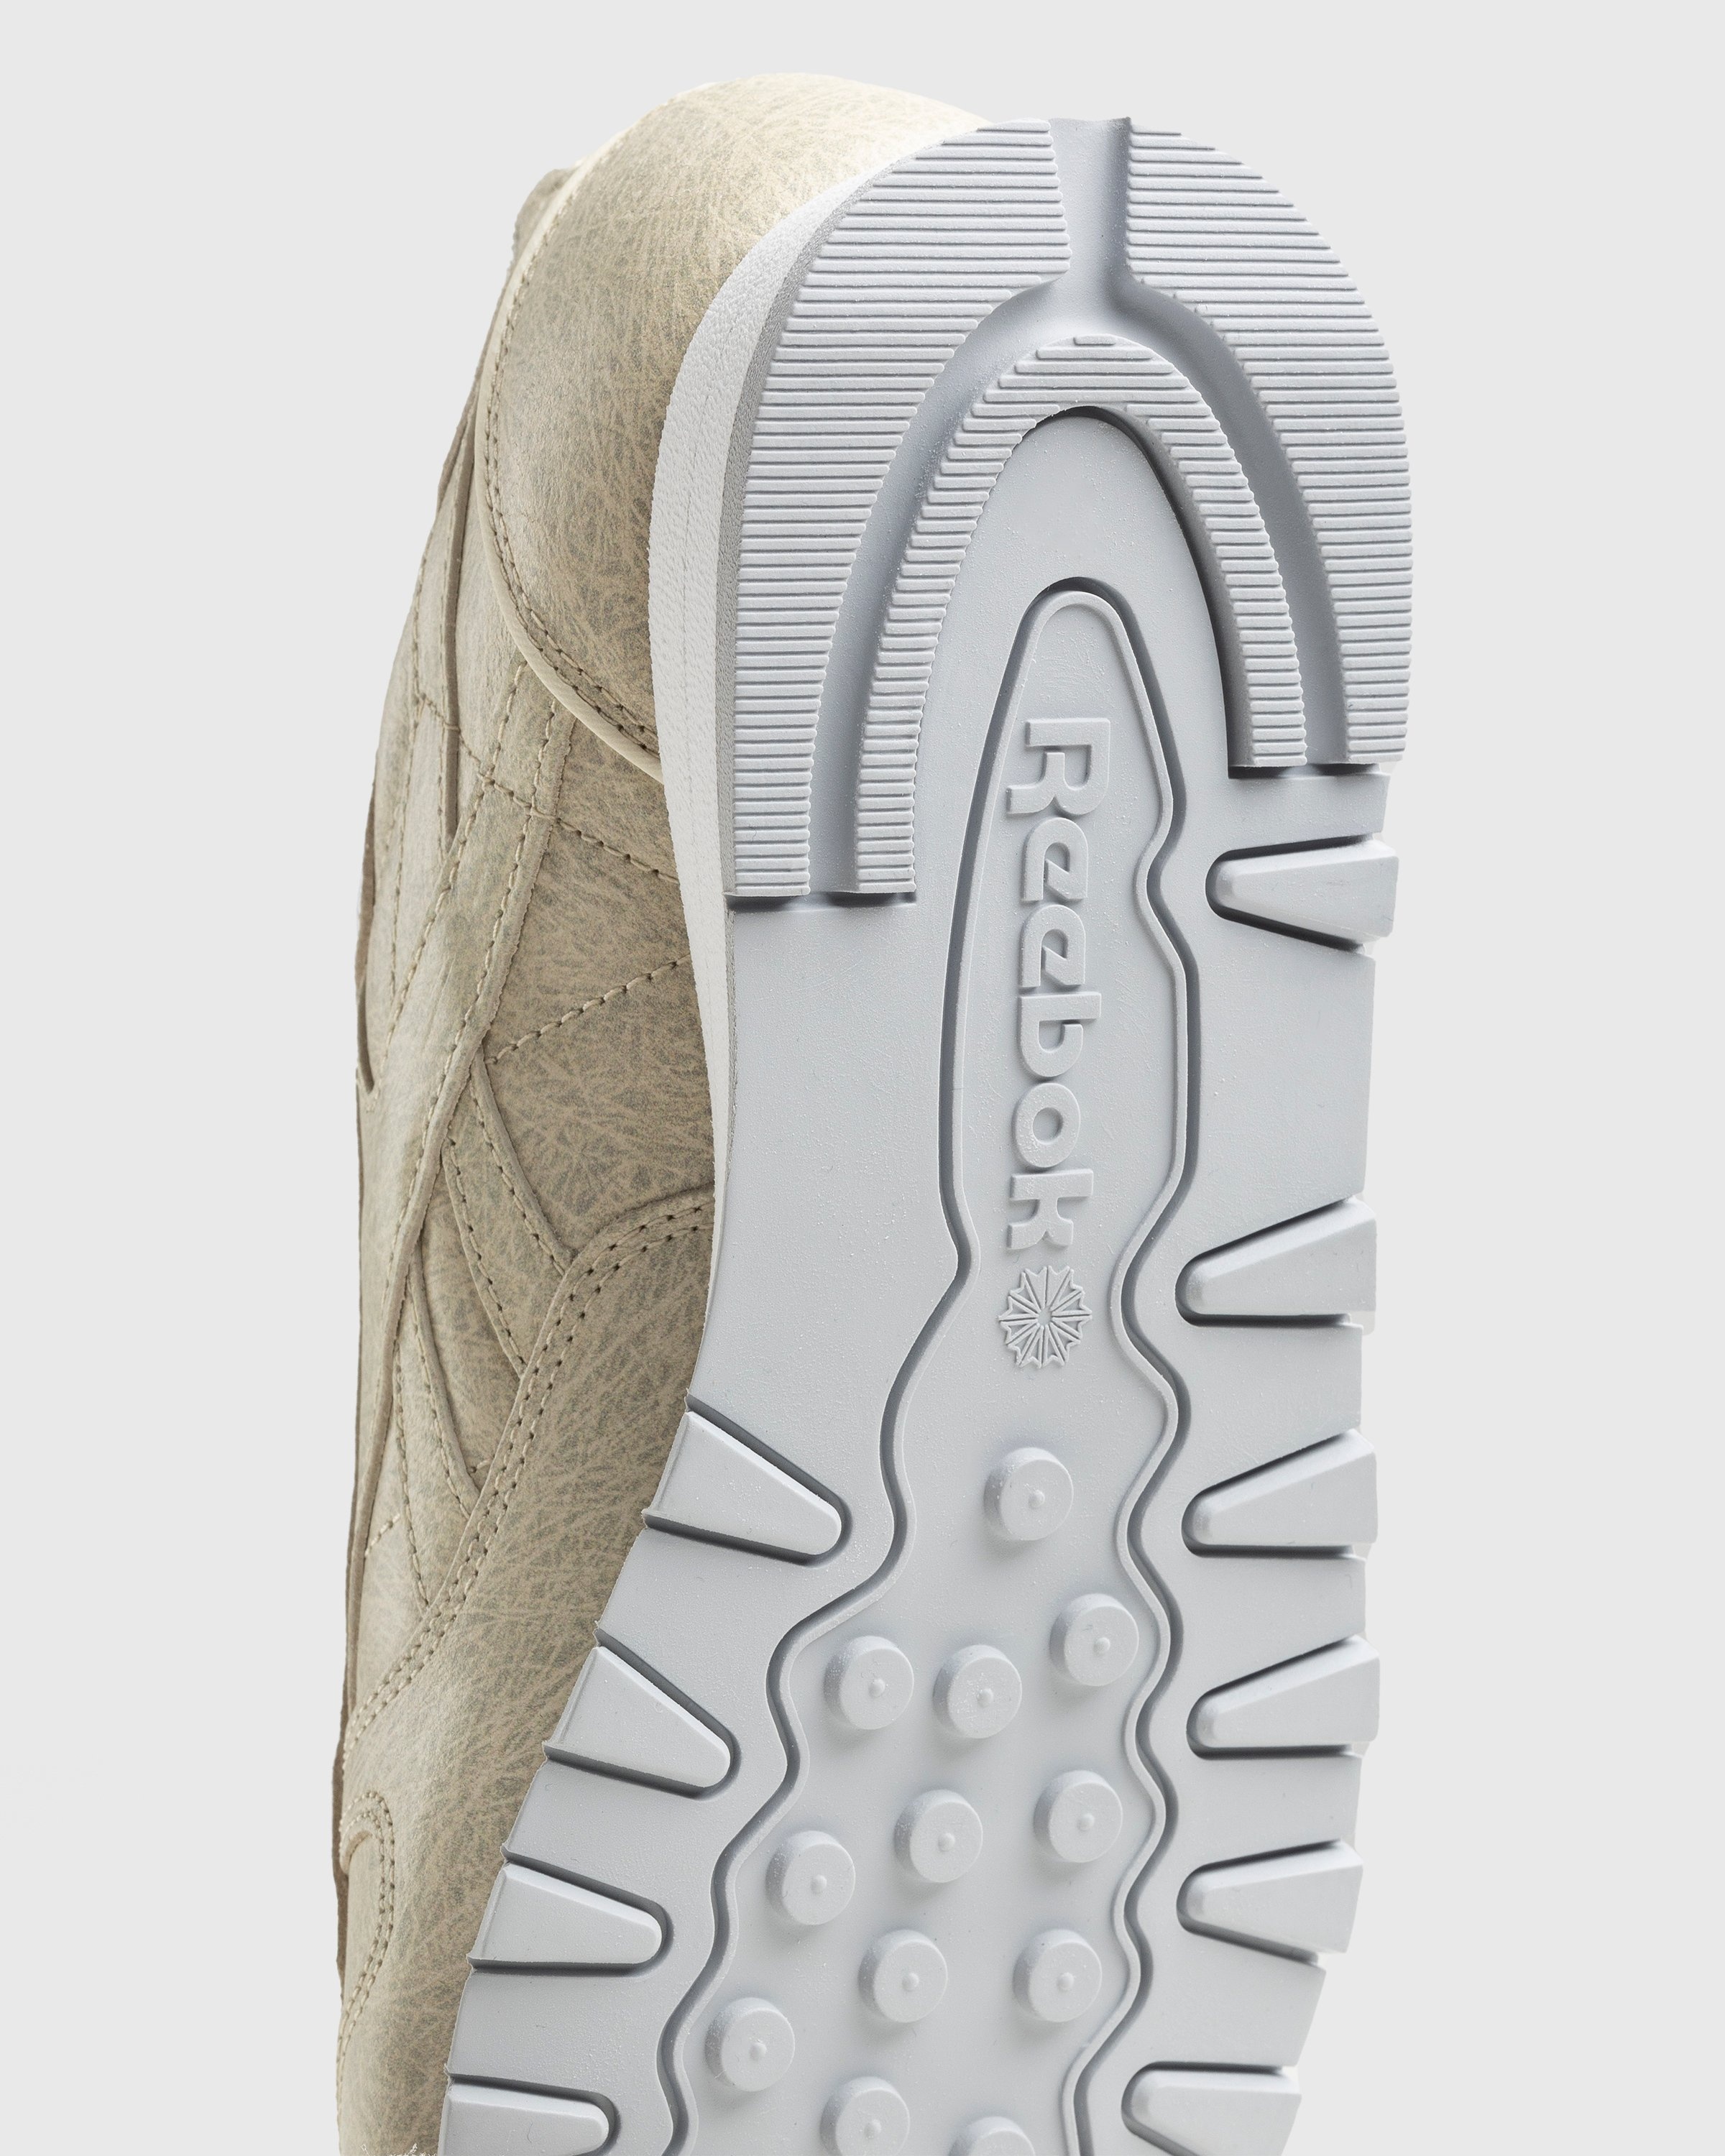 Reebok – Eames Classic Leather Sand - Low Top Sneakers - Beige - Image 6